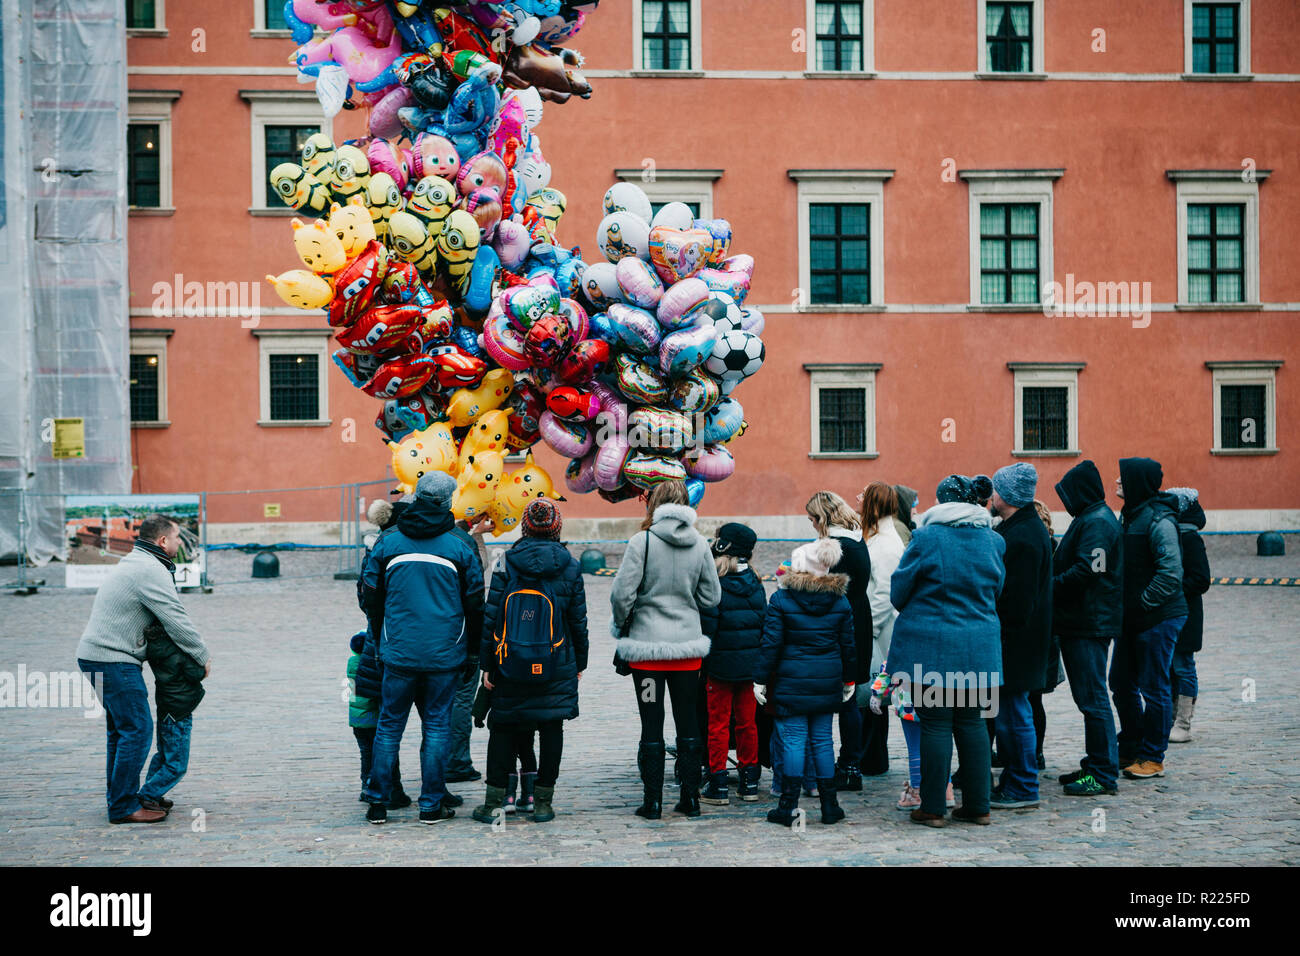 Warsaw, December 25, 2017: People in the main city square are waiting in line to buy balloons for fun. Celebration of Christmas in Europe. Stock Photo